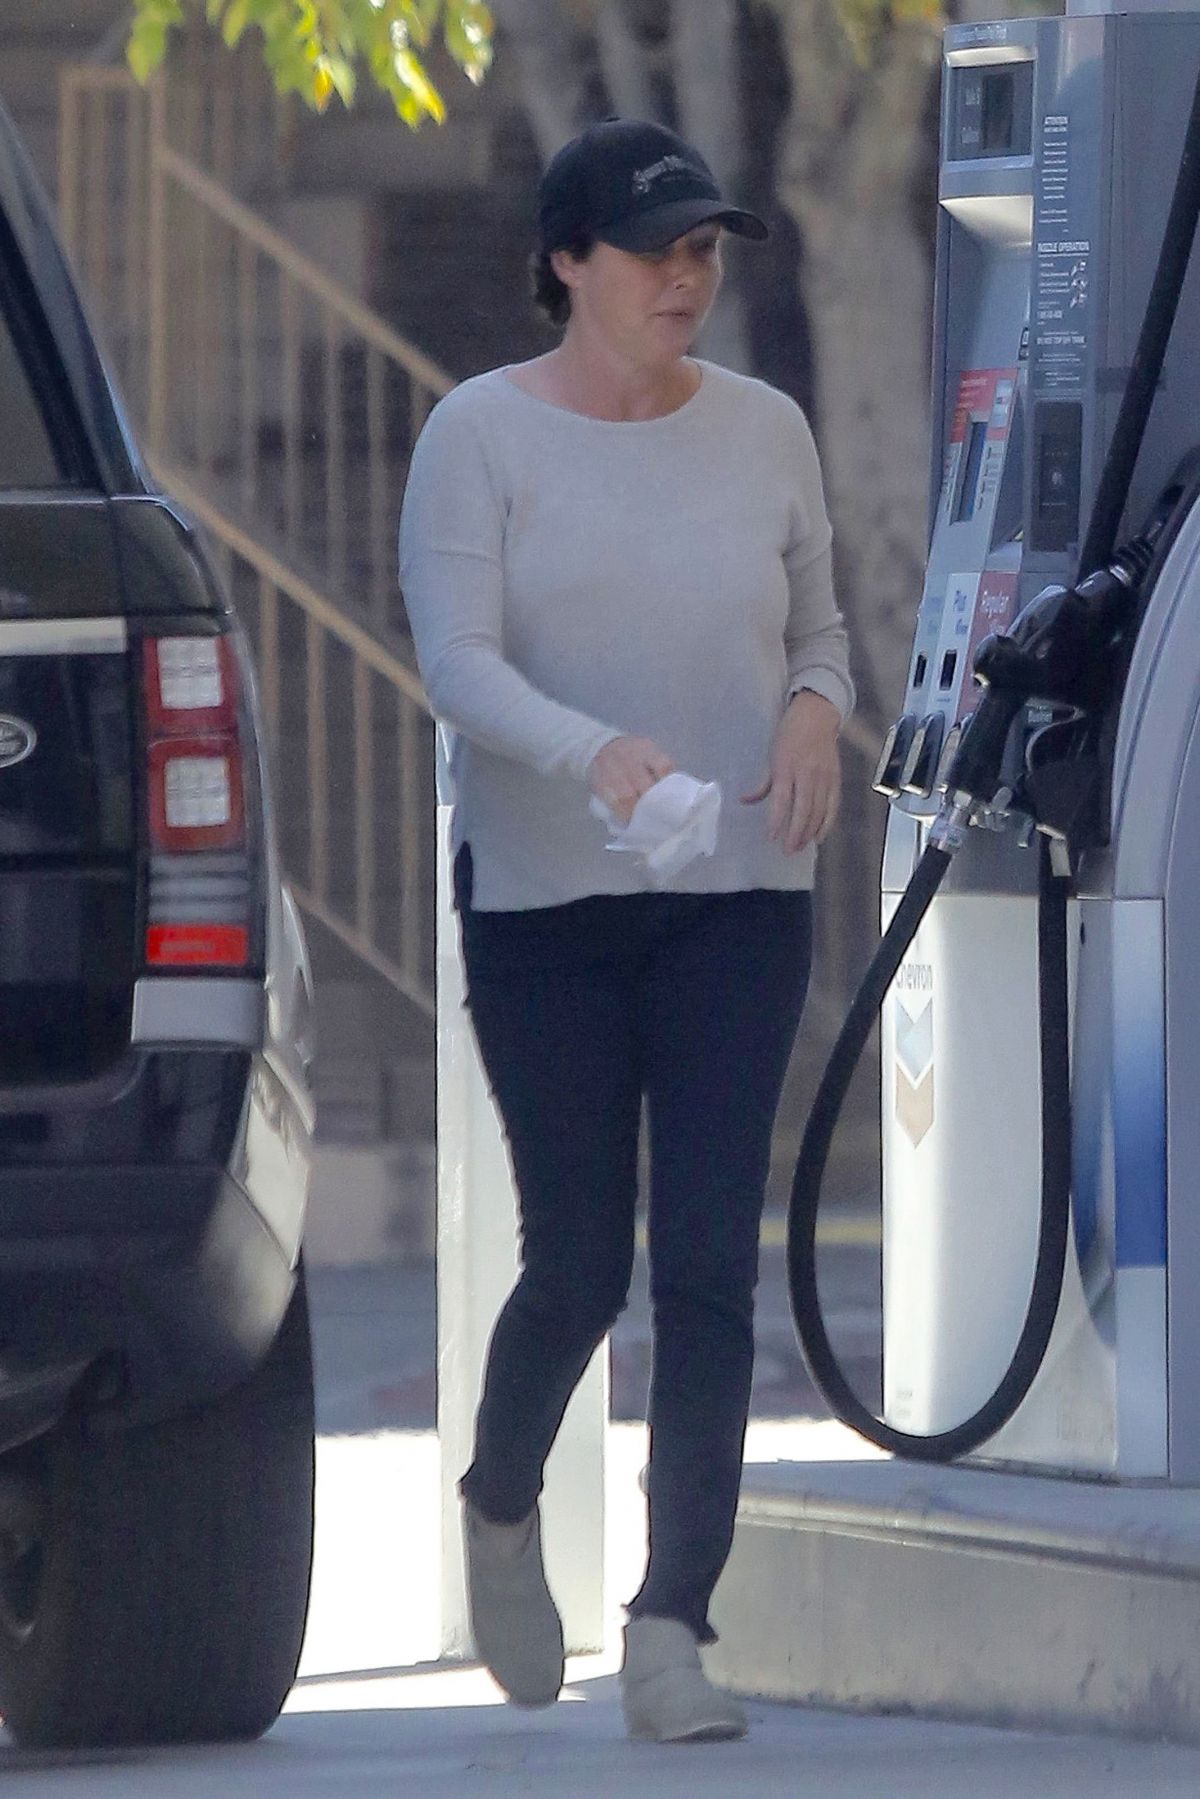 SHANNEN DOHERTY at a Gas Station in Los Angeles 05/22/2017 - HawtCelebs1200 x 1799